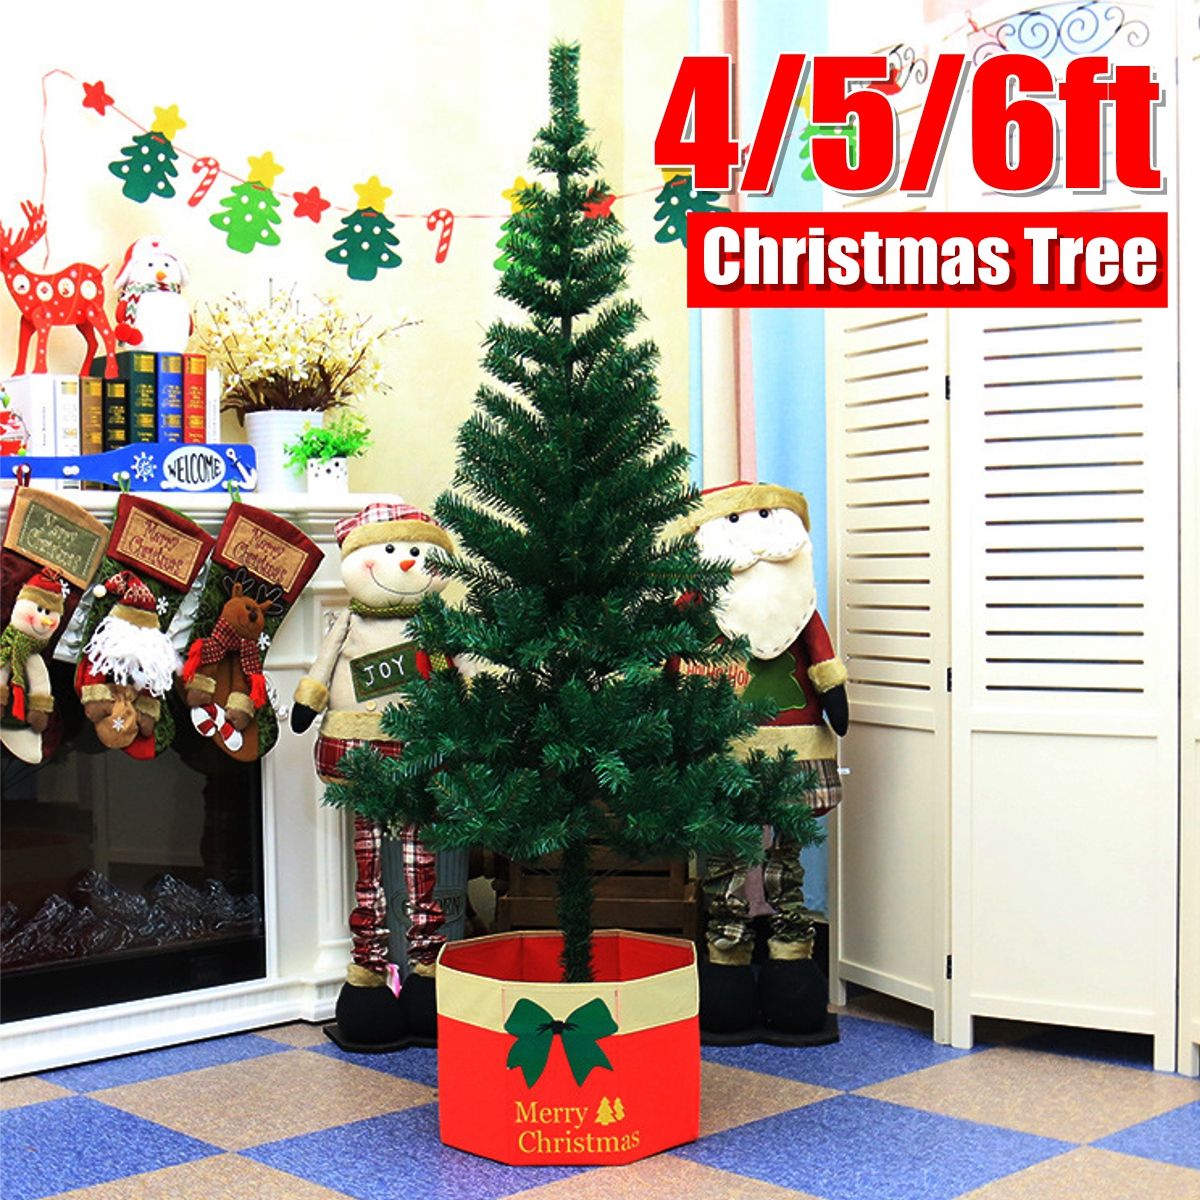 121518m-Artificial-Christmas-Tree-PVC-Pine-Needle-Encrypted-Mini-Tree-With-Solid-Stand-Holiday-Festi-1782561